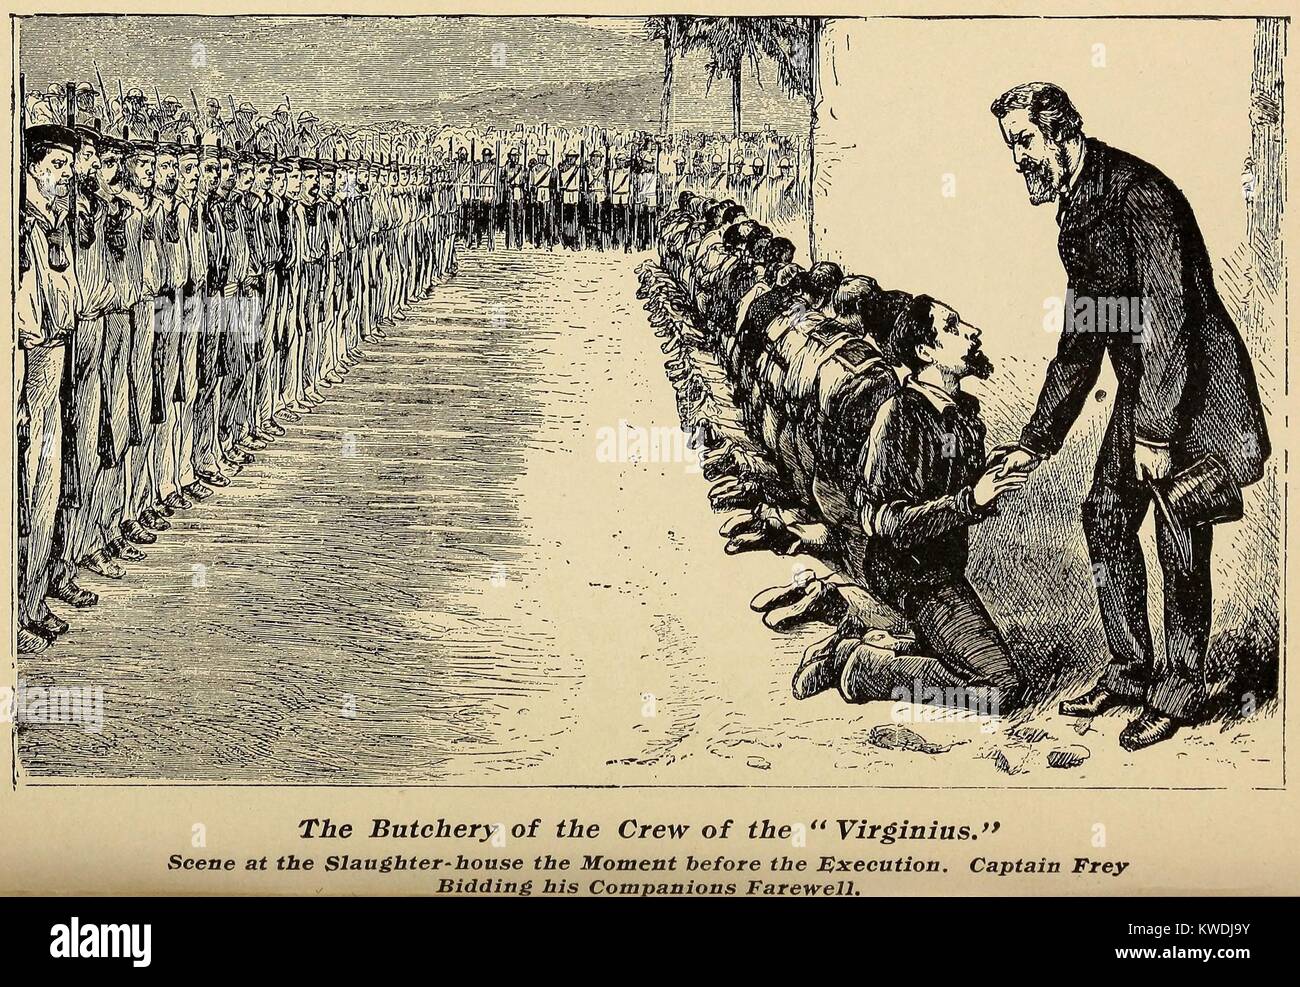 Capt. Joseph Fry of the ship Virginius bidding farewell to 37 of his crew before their execution in Cuba, Nov. 7, 1873. They were caught delivering arms to rebels during the Cuban War of Independence (1868-78). A Spanish-American war scare followed, but was resolved with the release of the 91 remaining seaman in Jan. 1874 (BSLOC 2017 10 1) Stock Photo